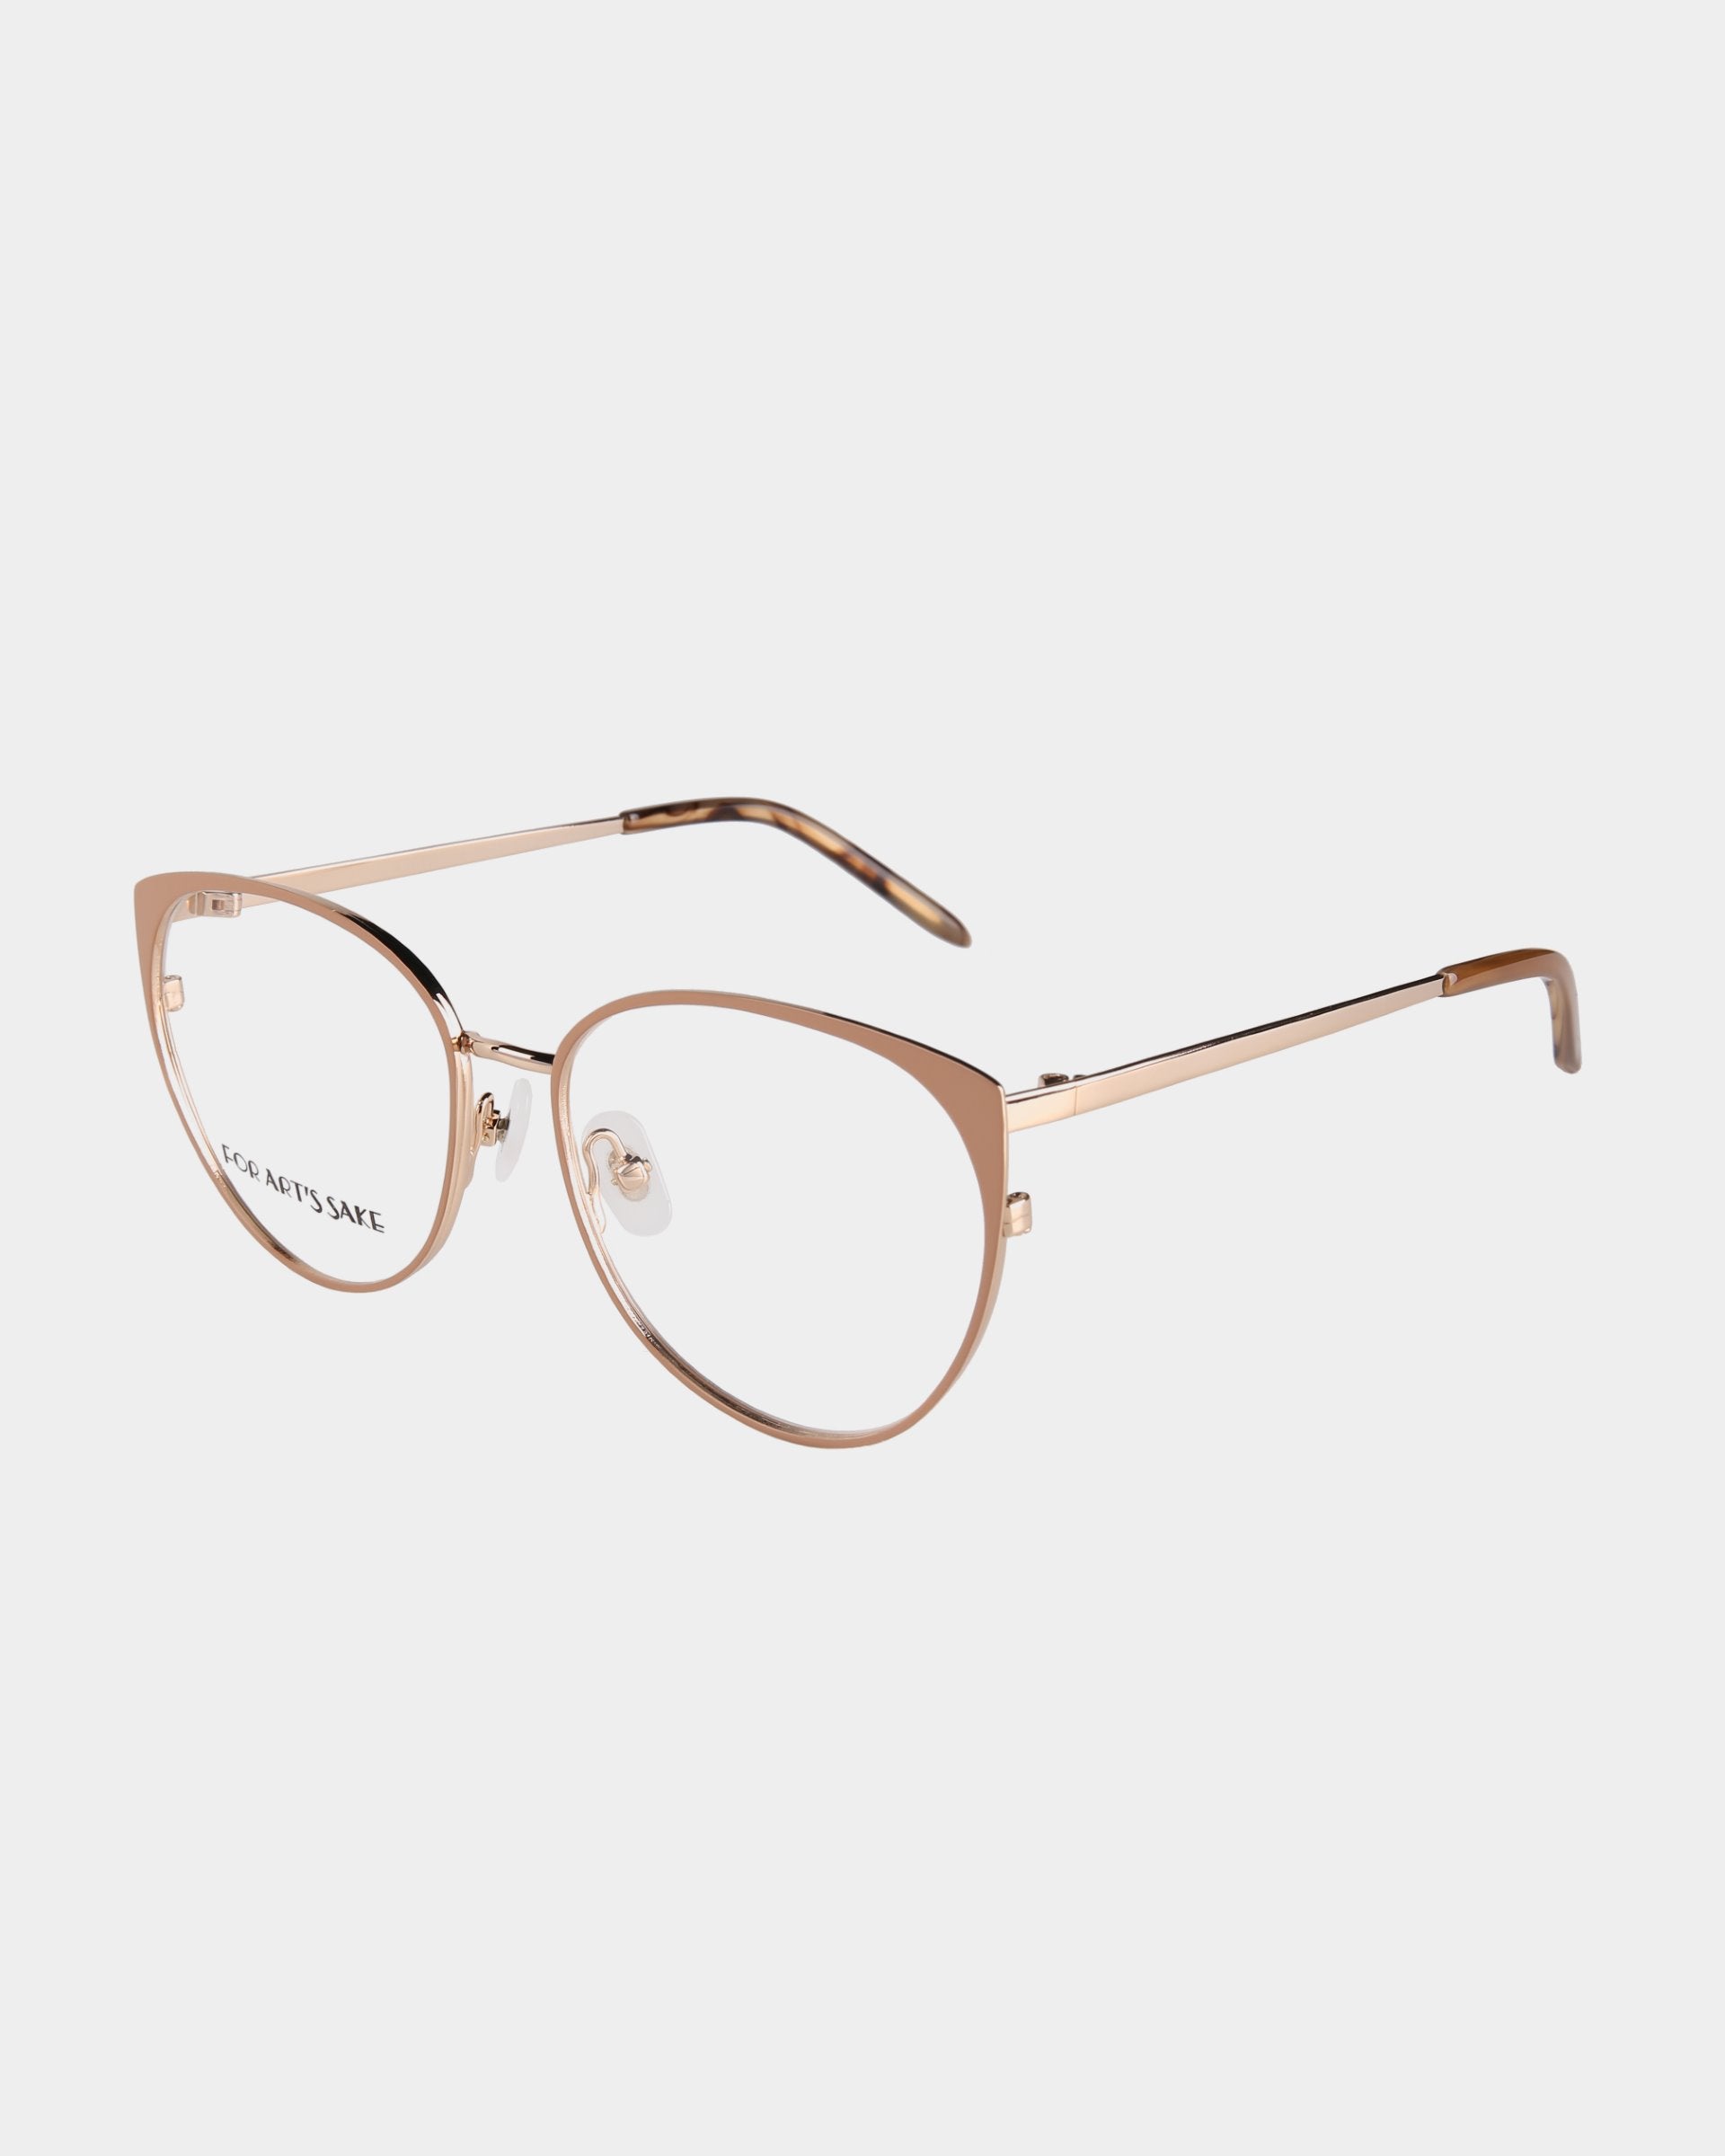 A pair of elegant, rose gold eyeglasses with a sleek and modern cat-eye frame design. Featuring 18-karat gold plating, the Kaia glasses by For Art&#39;s Sake® have thin metal arms and clear lenses, suitable for both fashion and functionality. The lightweight frame includes subtle, stylish detailing.